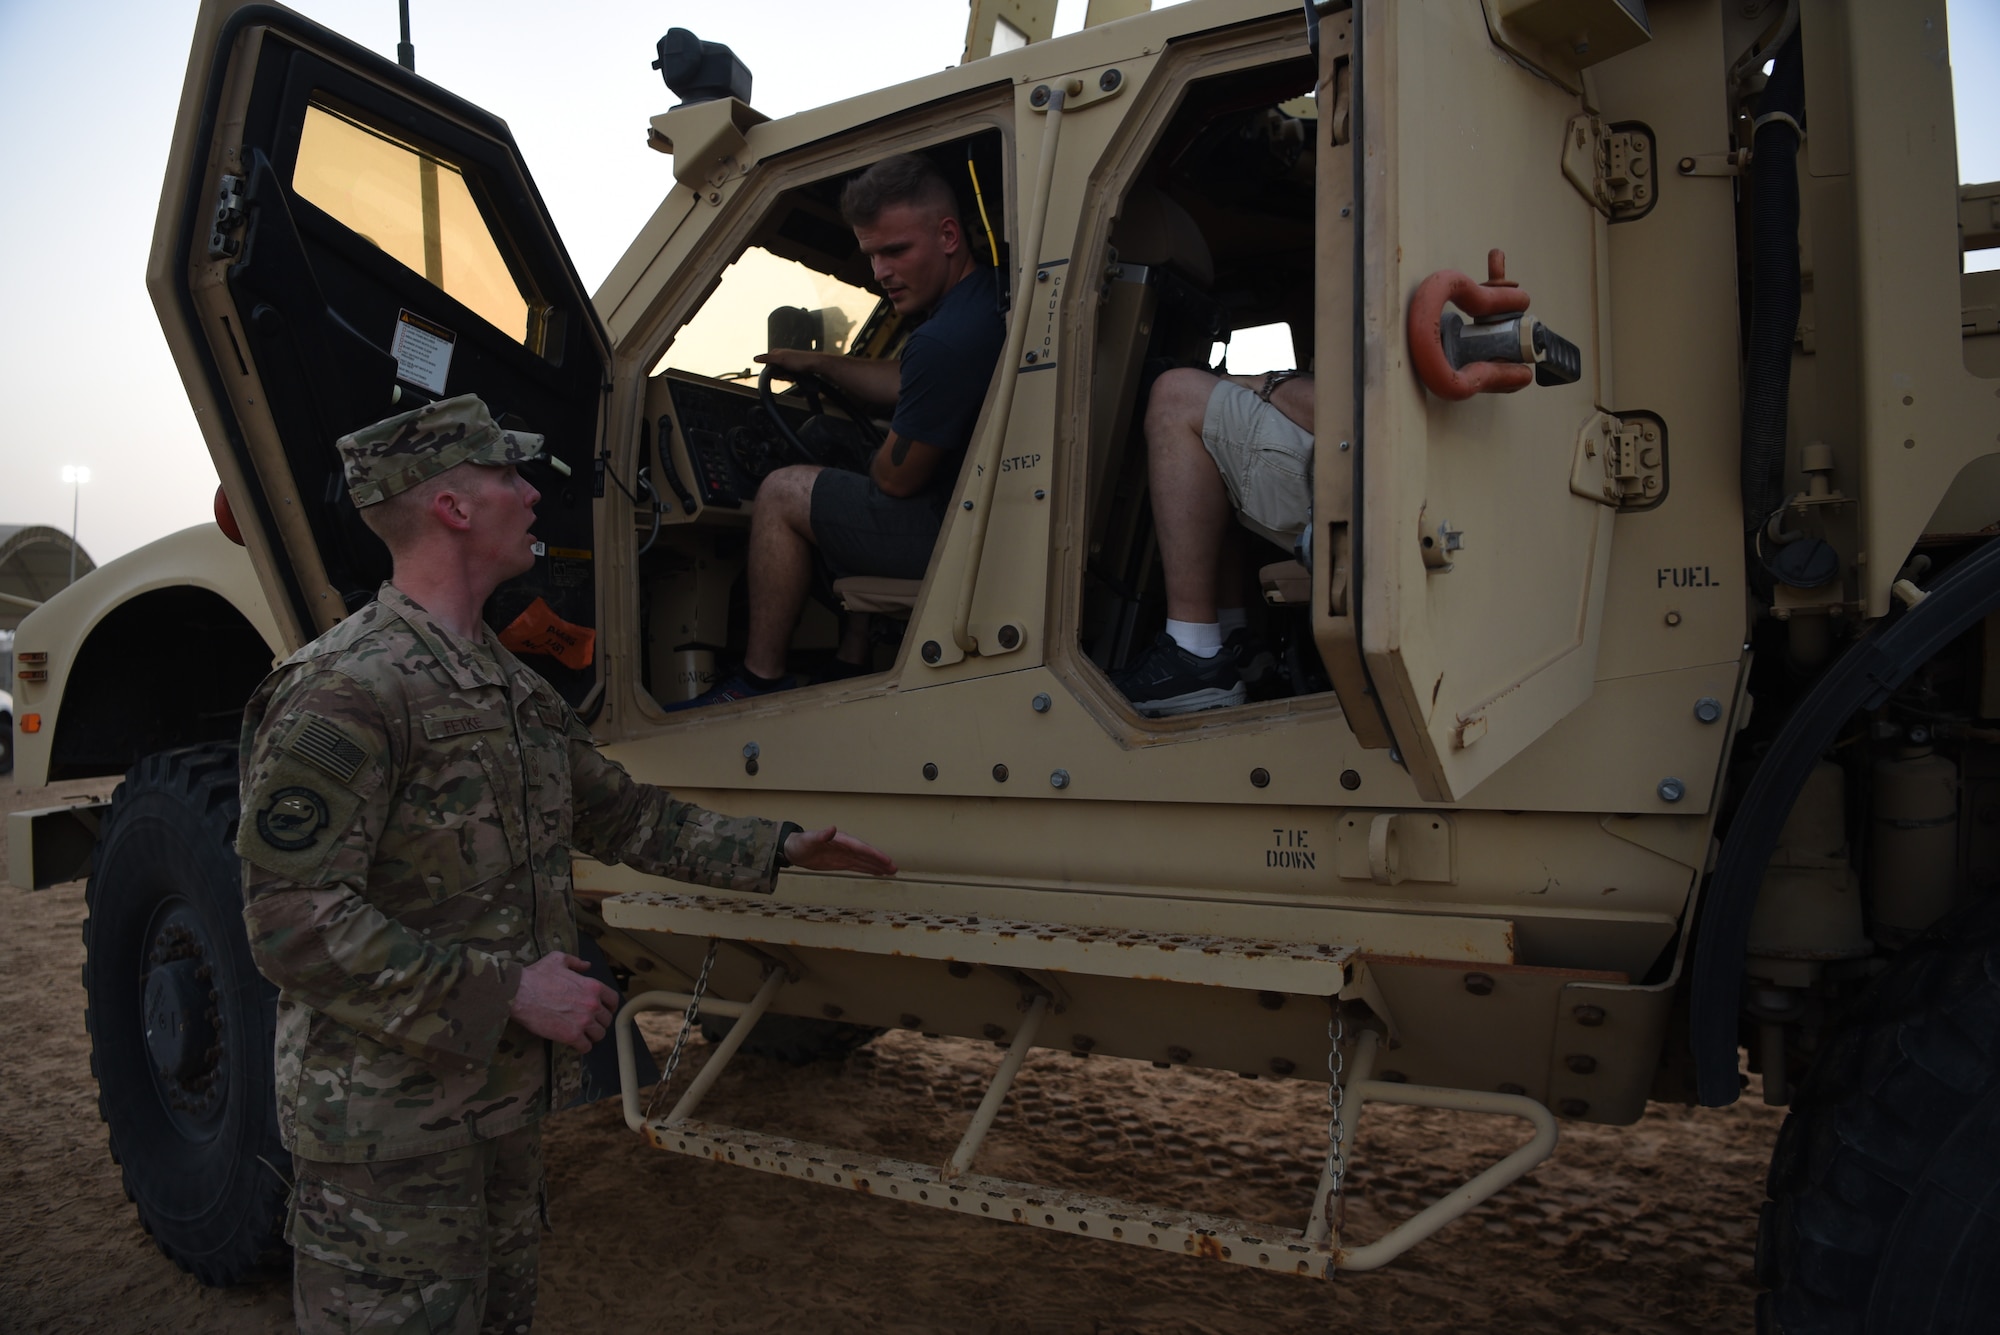 Master Sgt. Sean Fetke, 380th Expeditionary Security Forces training section chief, answers questions about the Mine Resistant Ambush Protected vehicle displayed during Police Week 2019, May 13, 2019, at Al Dhafra Air Base, United Arab Emirates.